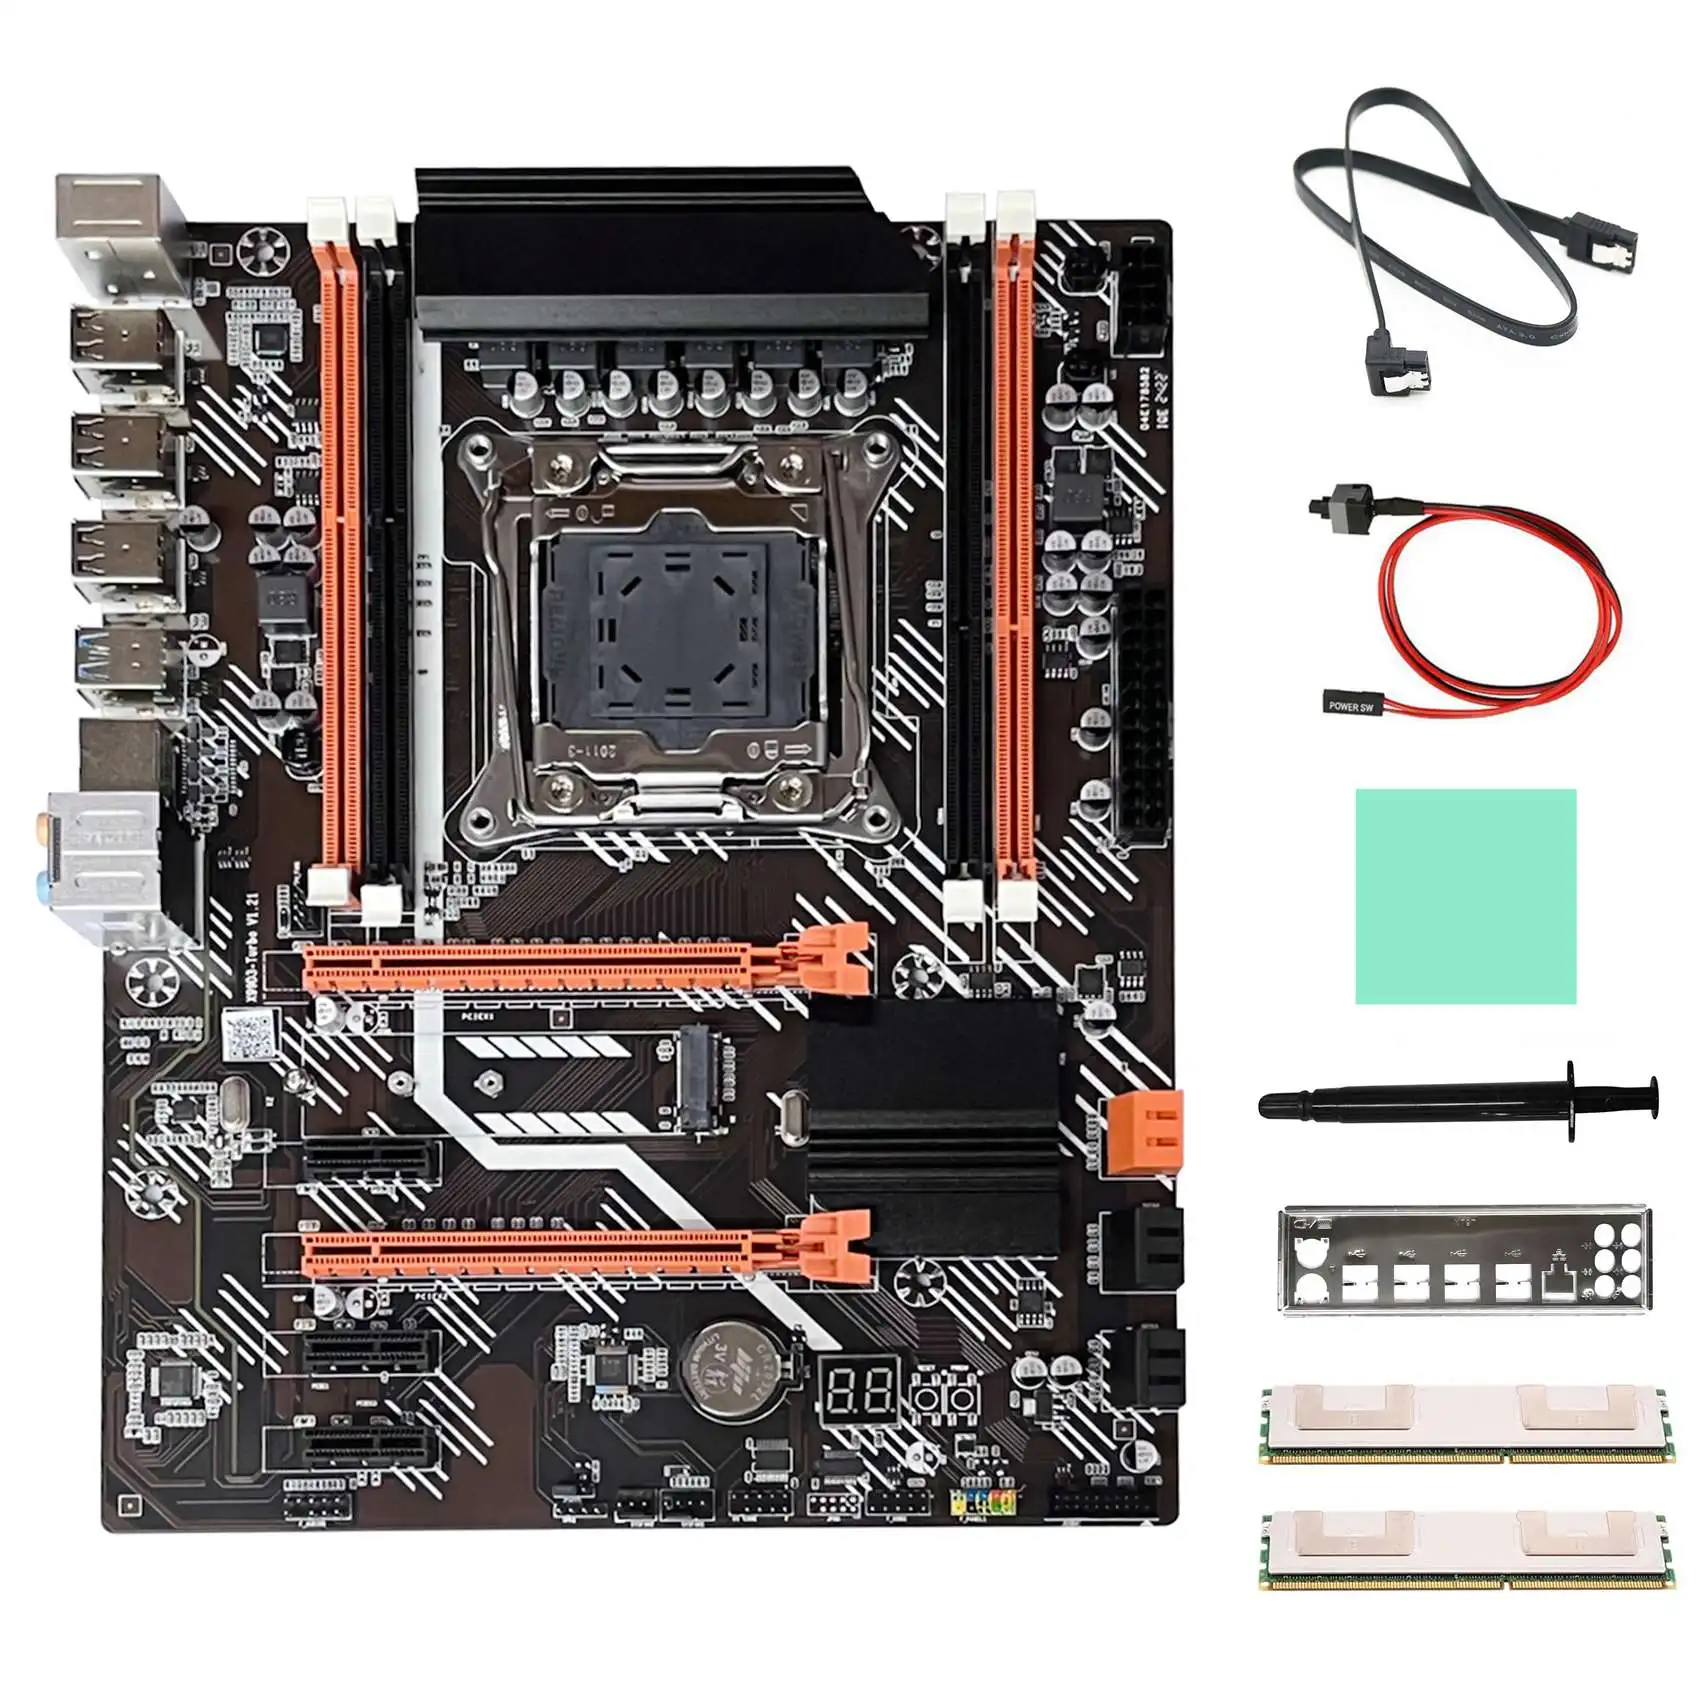 

X99 Motherboard+2XDDR3 4G RECC Ram+SATA Cable+Switch Cable+Baffle+Thermal Grease LGA2011 V3 M.2 NVME NGFF for DDR3 4X16G